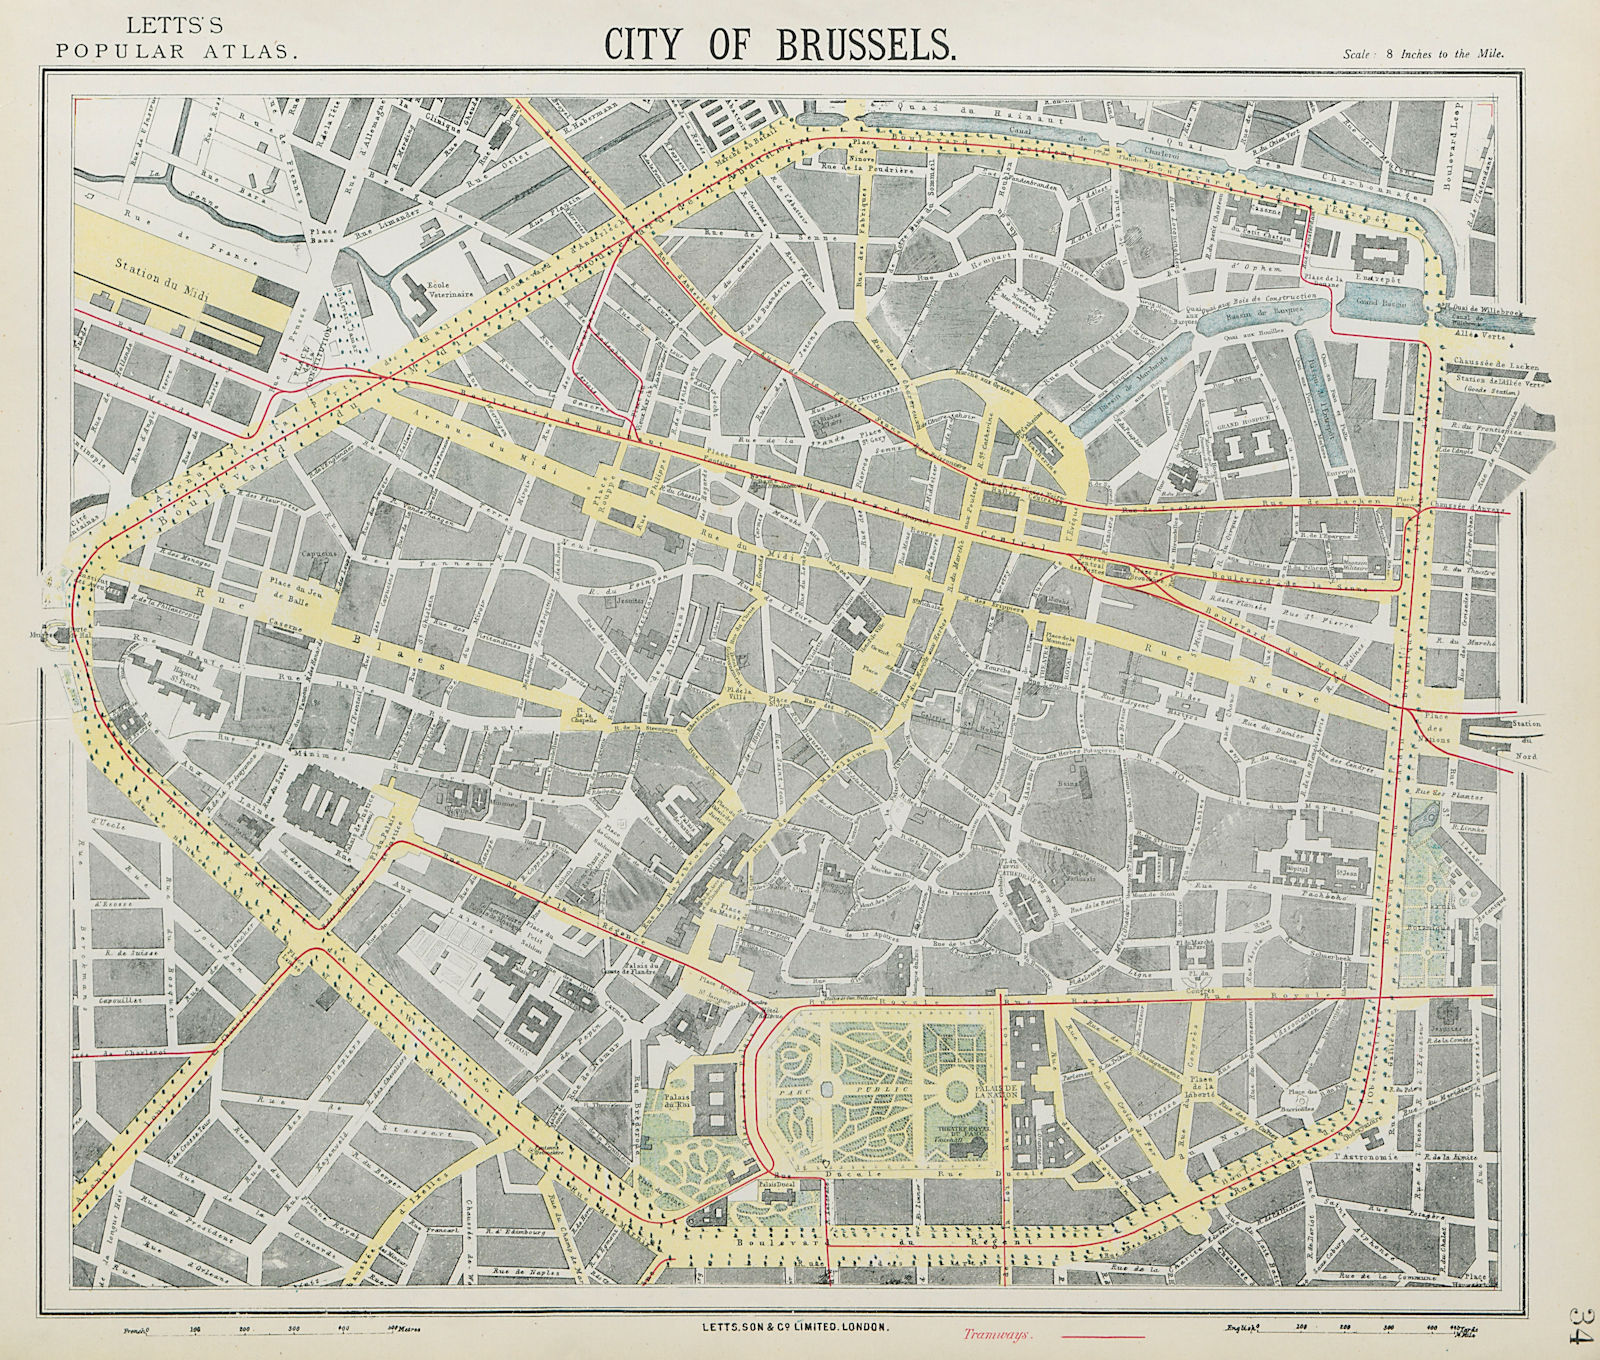 Associate Product BRUSSELS BRUXELLES BRUSSEL antique town city map plan. Tramways. LETTS 1884